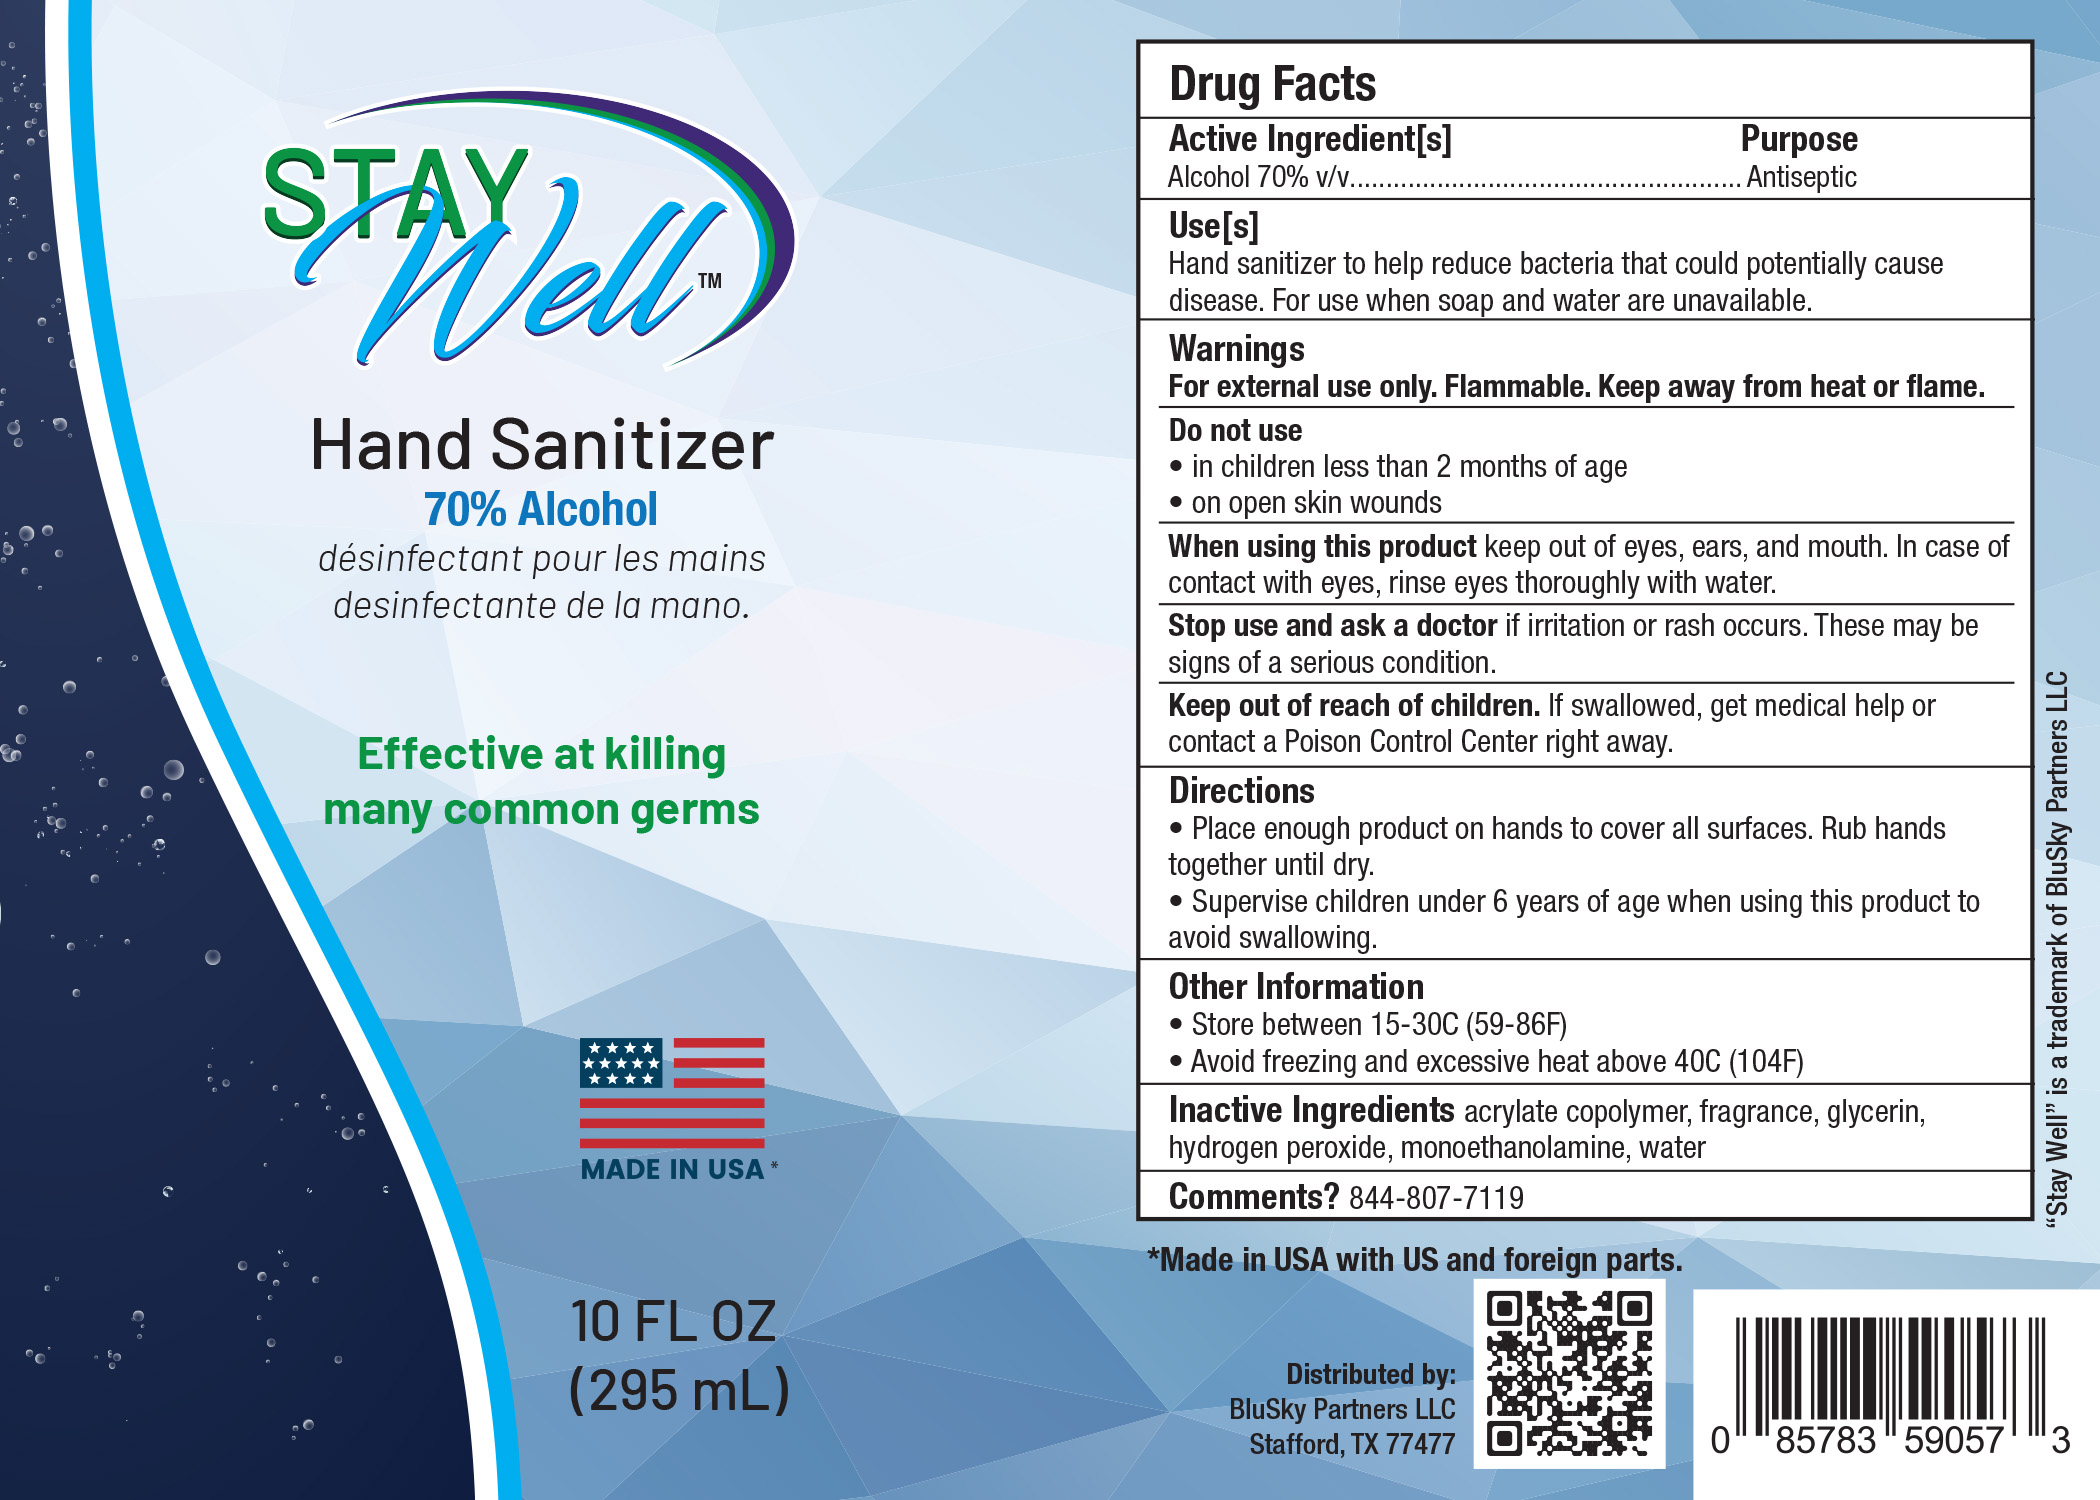 Stay Well 10 oz Label